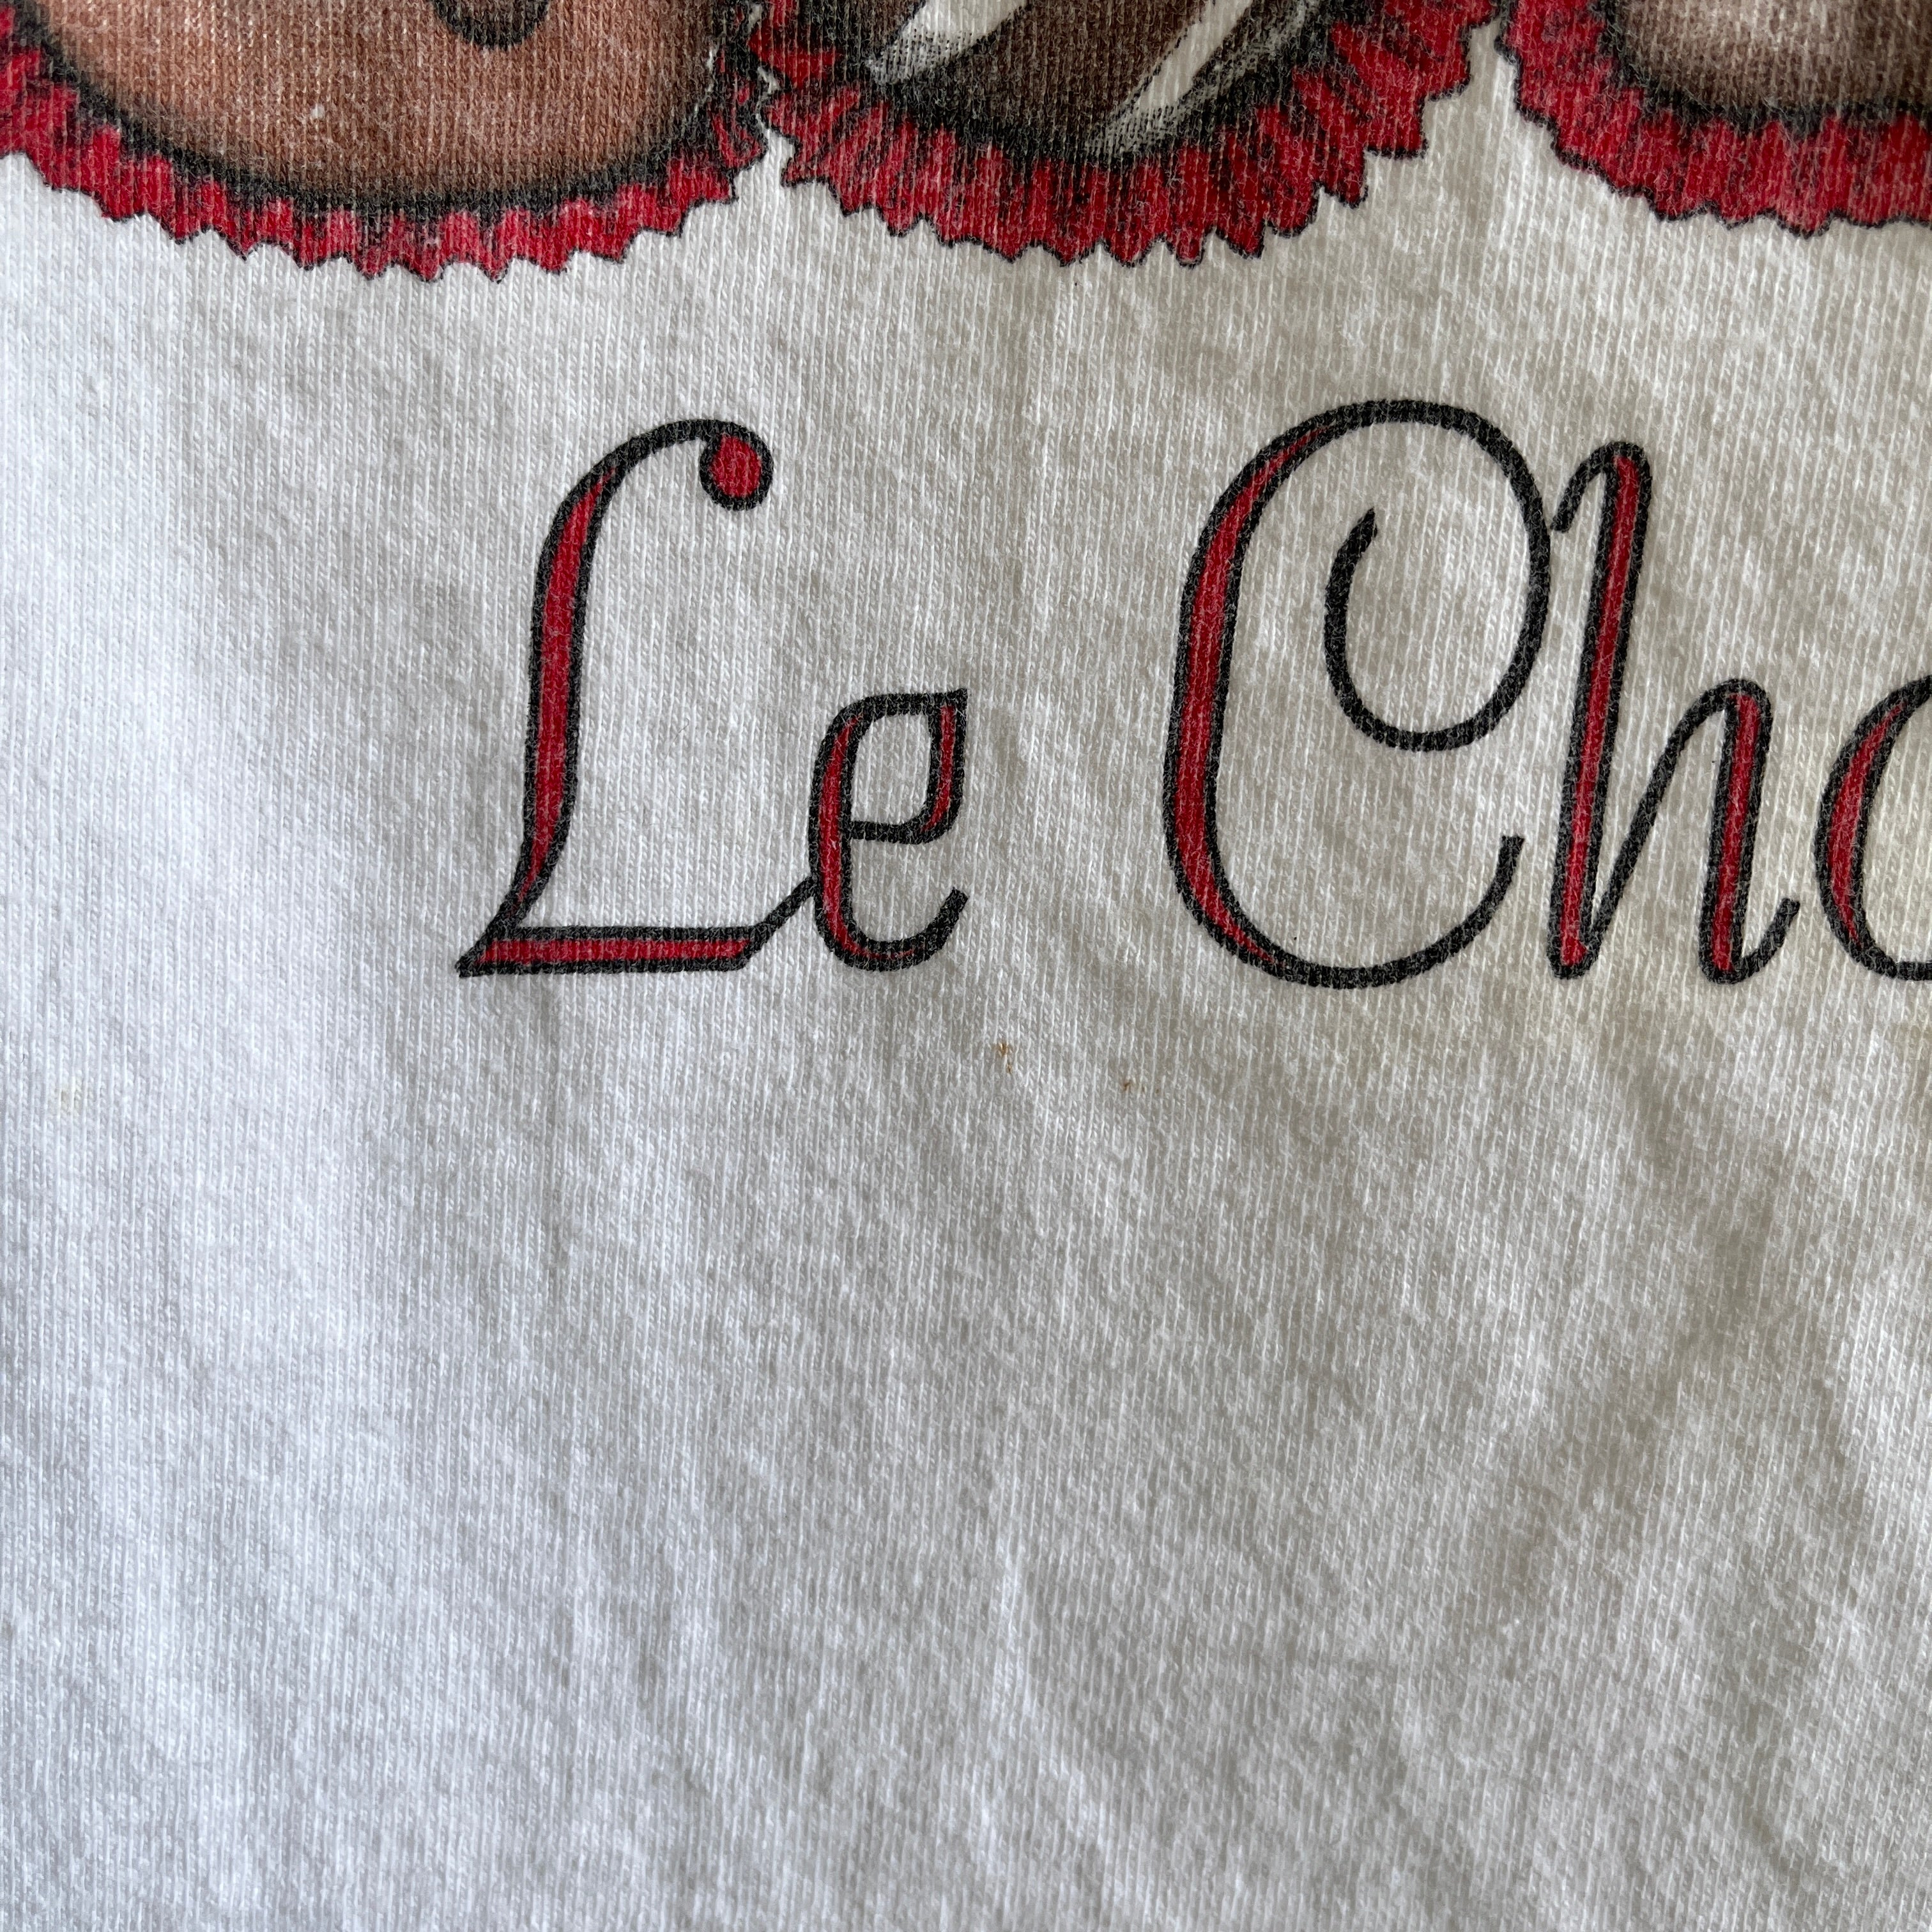 1992 Le Chocolat Cotton T-Shirt by Tee Jays